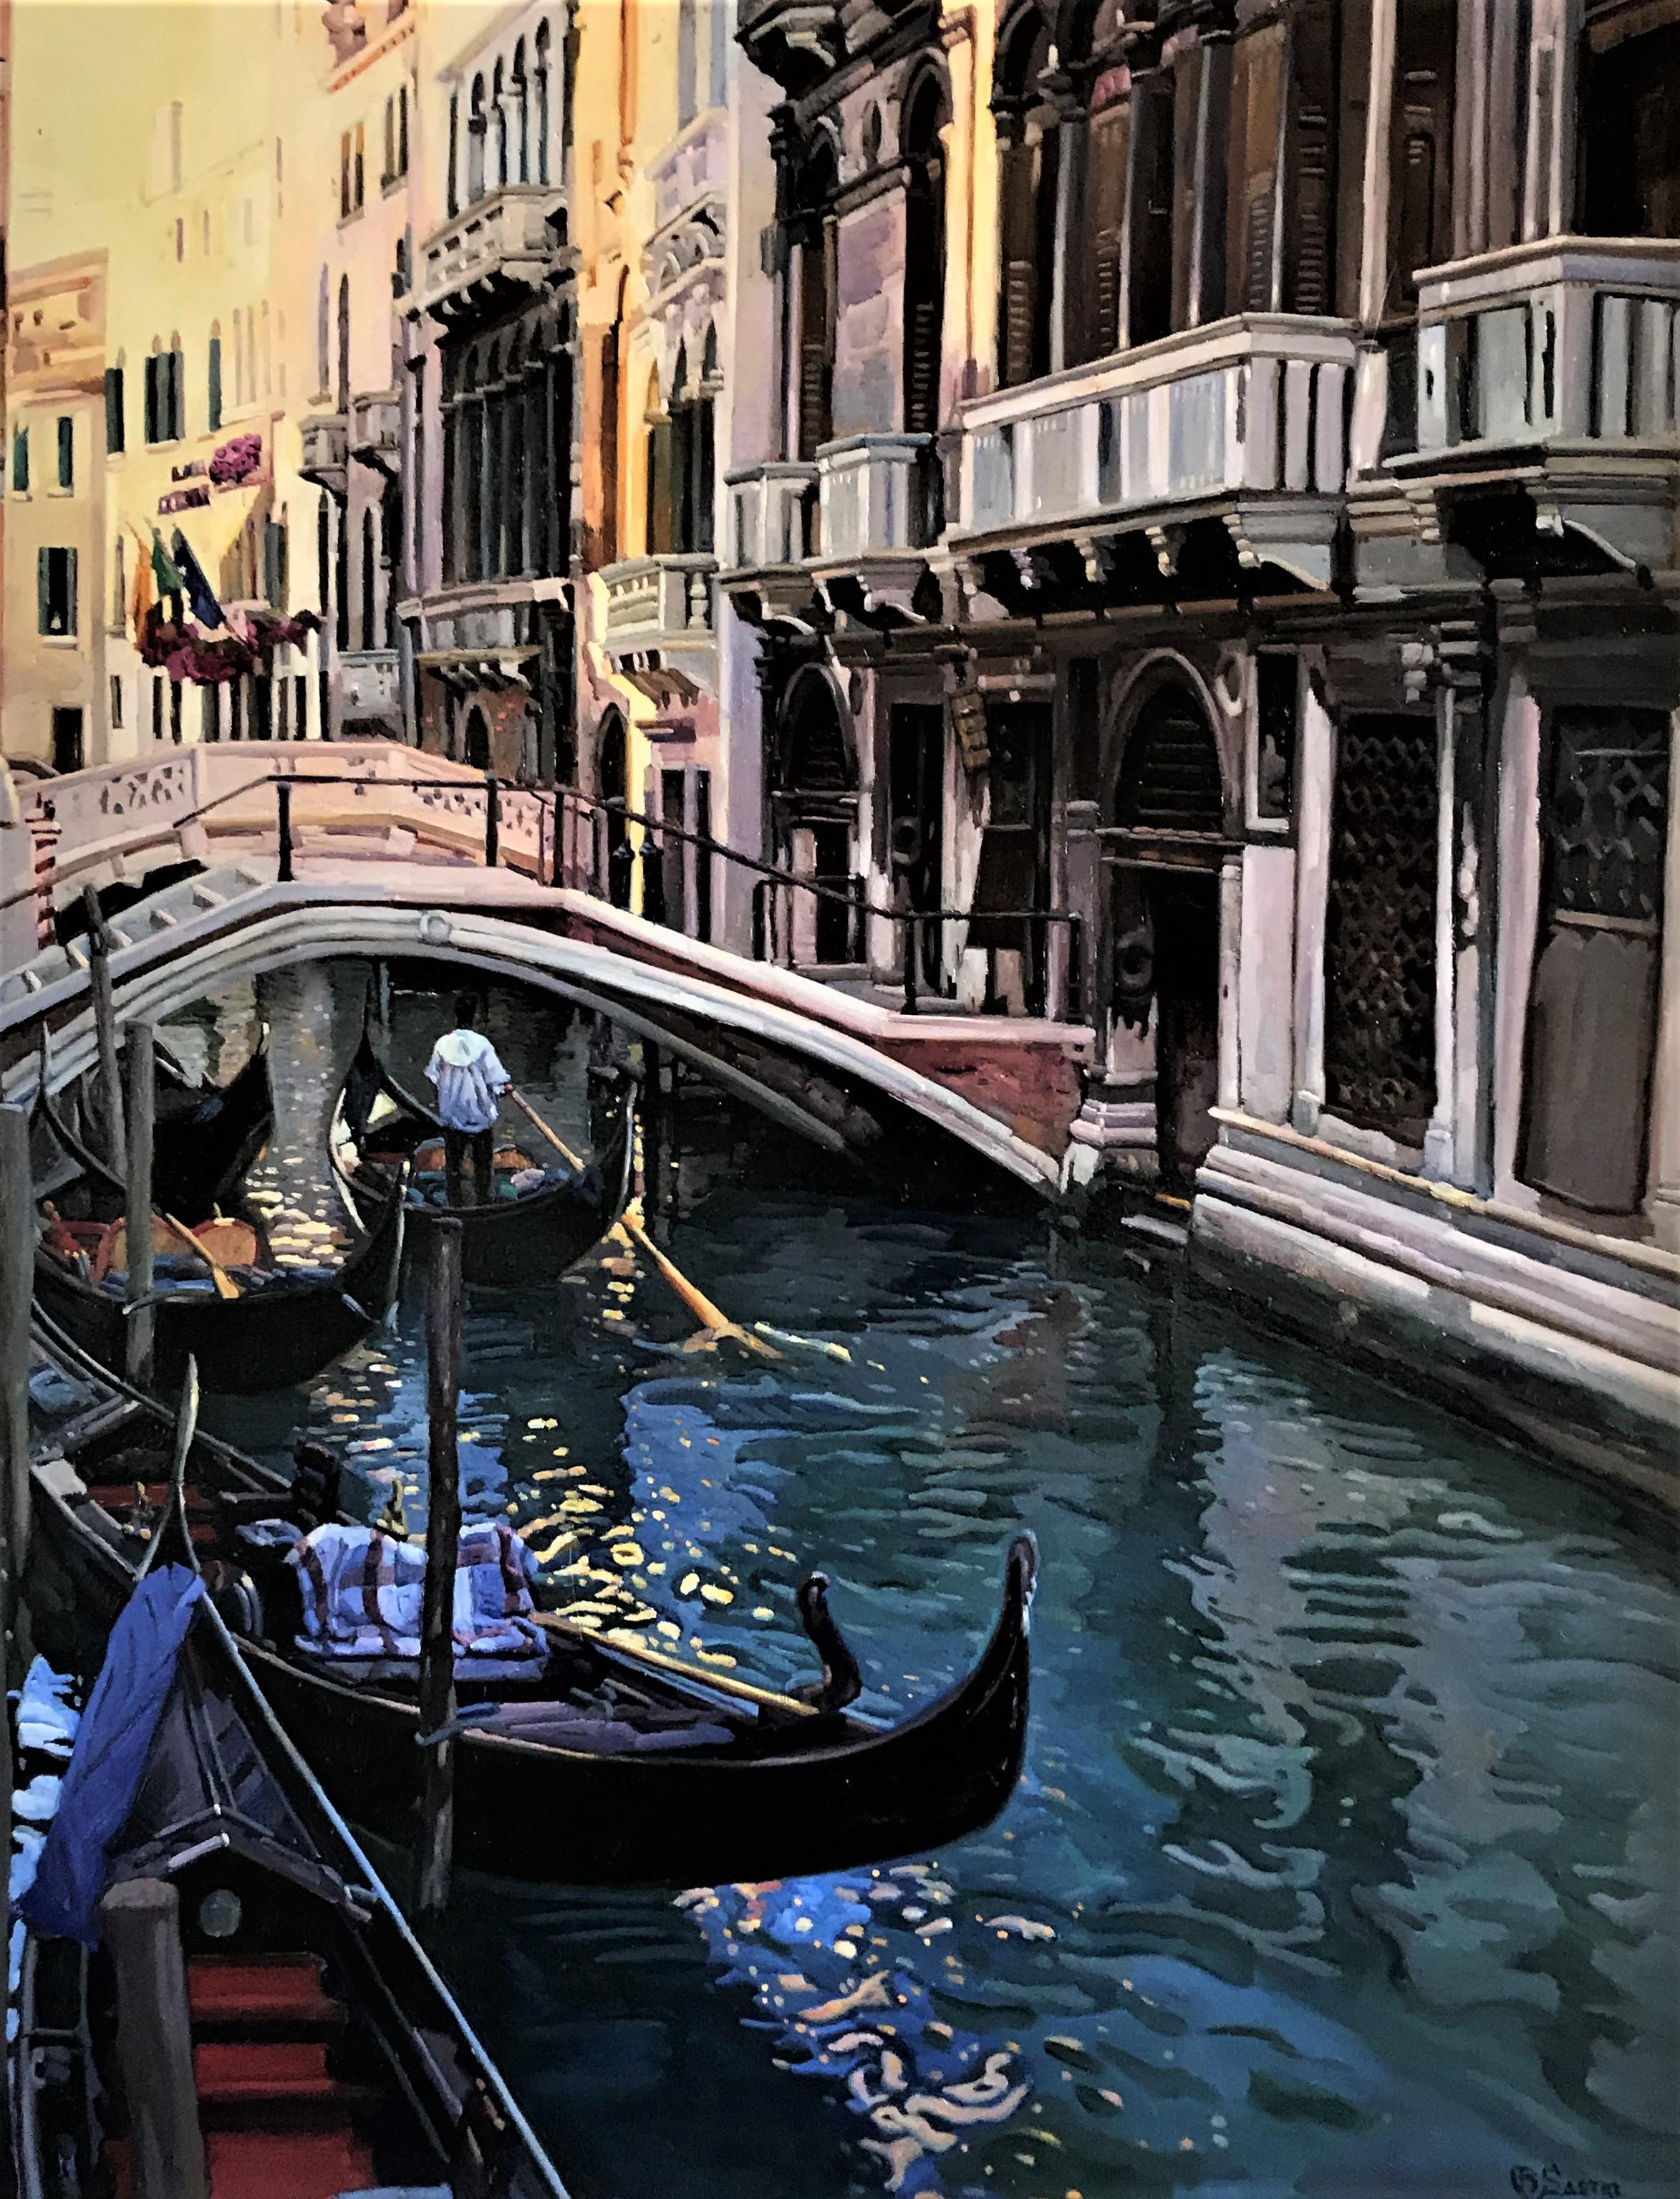 Bartolome Sastre (b 1947)

Title:               Venice Canal Scene
Medium:         Oil Painting on Canvas, Framed 
Dimensions:   56 x 44 in
